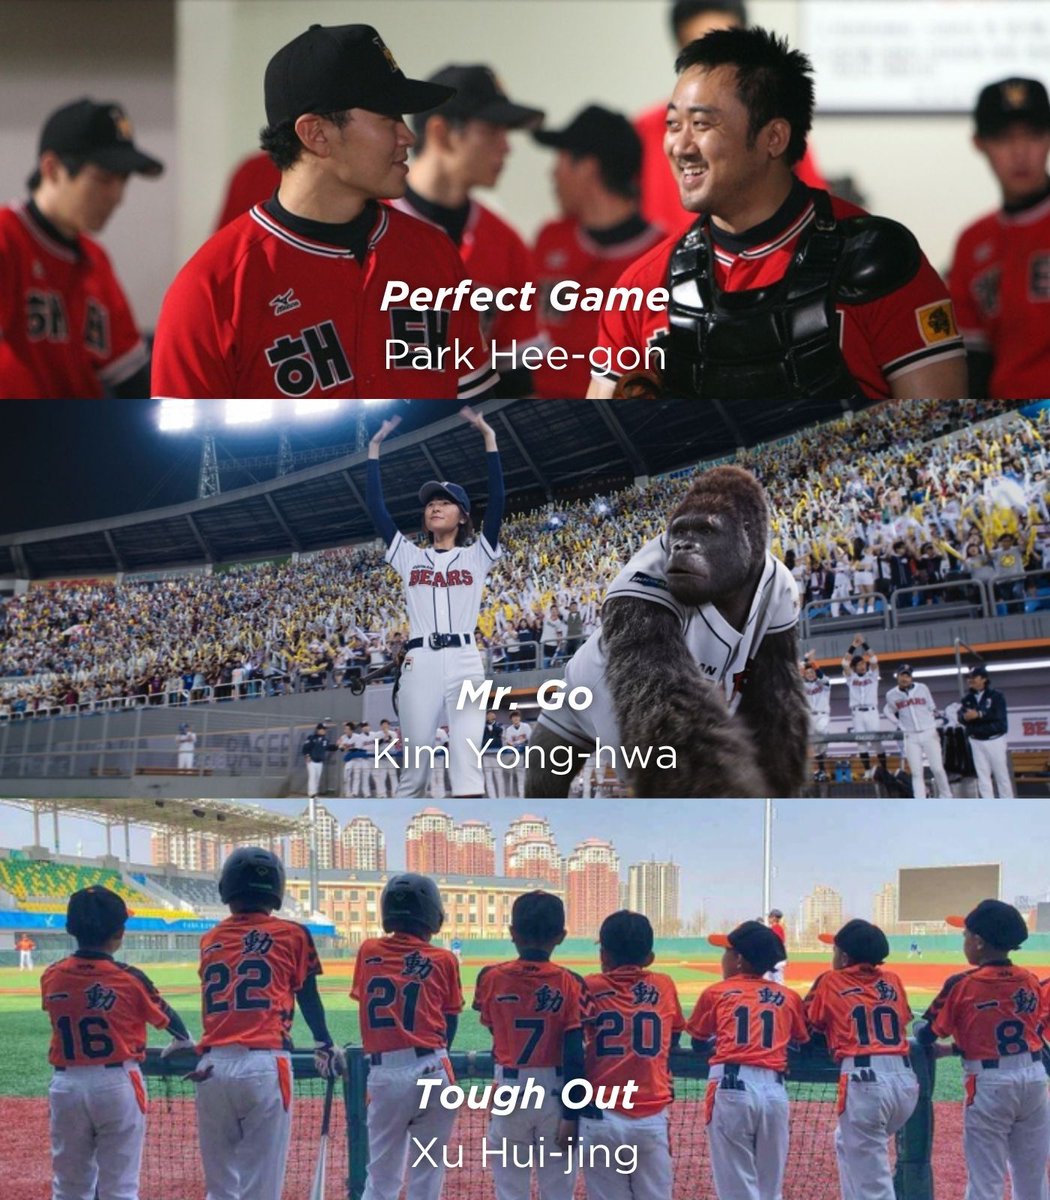 ⚾️ Throw some pitches for this week’s #ThrowbackThursday with 5 exhilarating baseball movies screened by NYAFF and @KoreanCultureNY! The 24th edition of the New York Asian Film Festival will be held from July 12-28, 2024 at @filmlinc and @svatheatre. Save the dates!